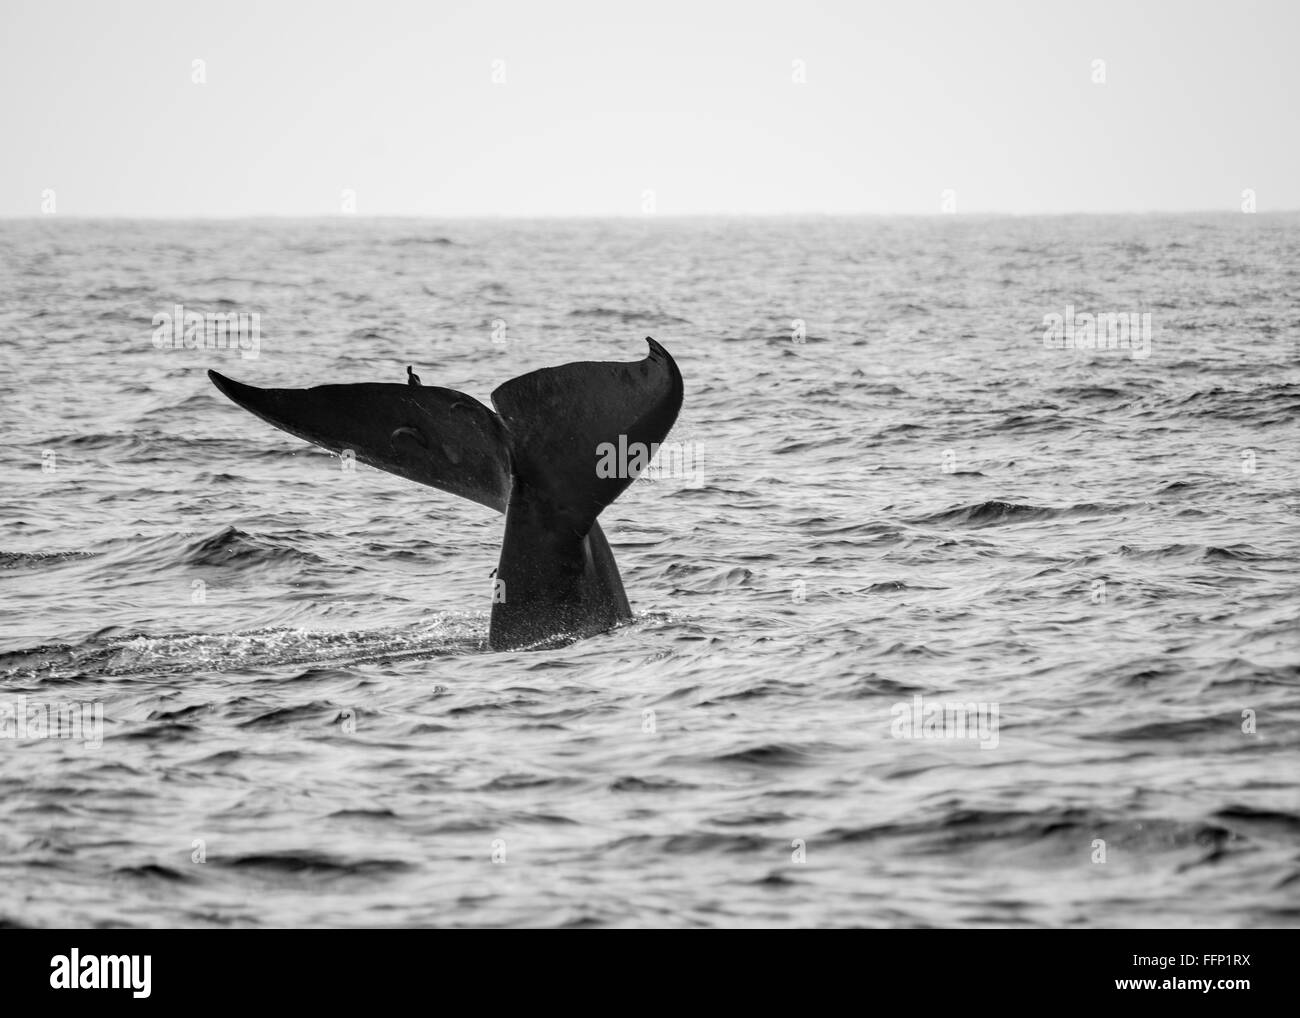 Whale sucker Black and White Stock Photos & Images - Alamy